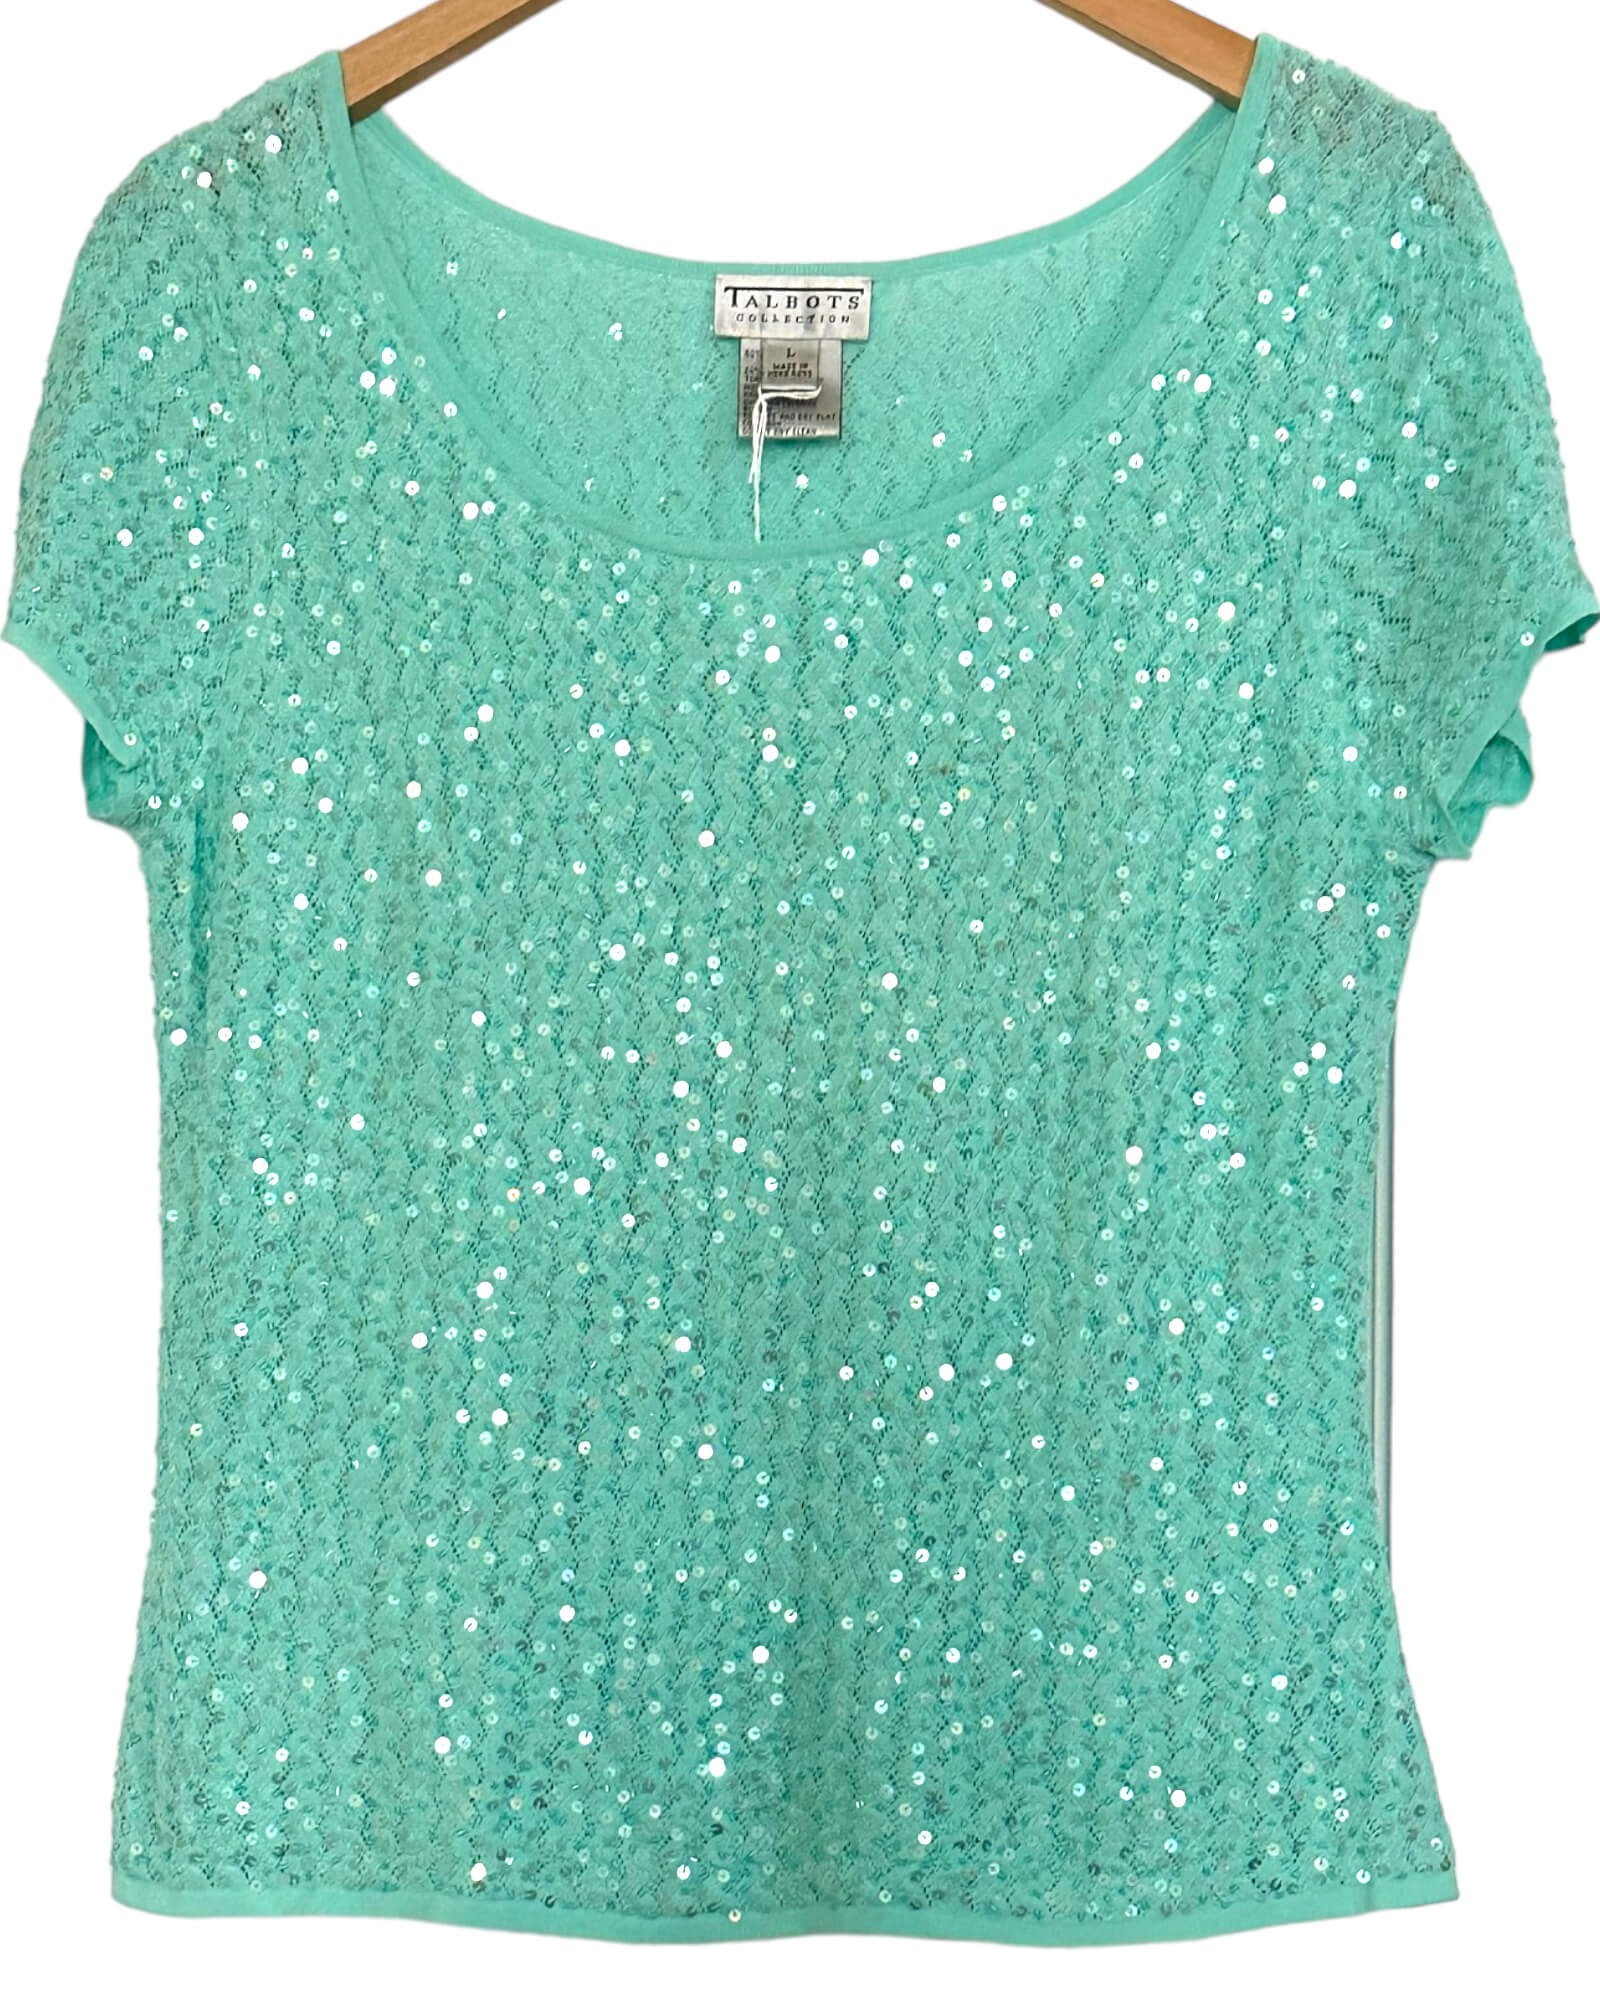 Light Spring TALBOTS undine green sequin lace knit top